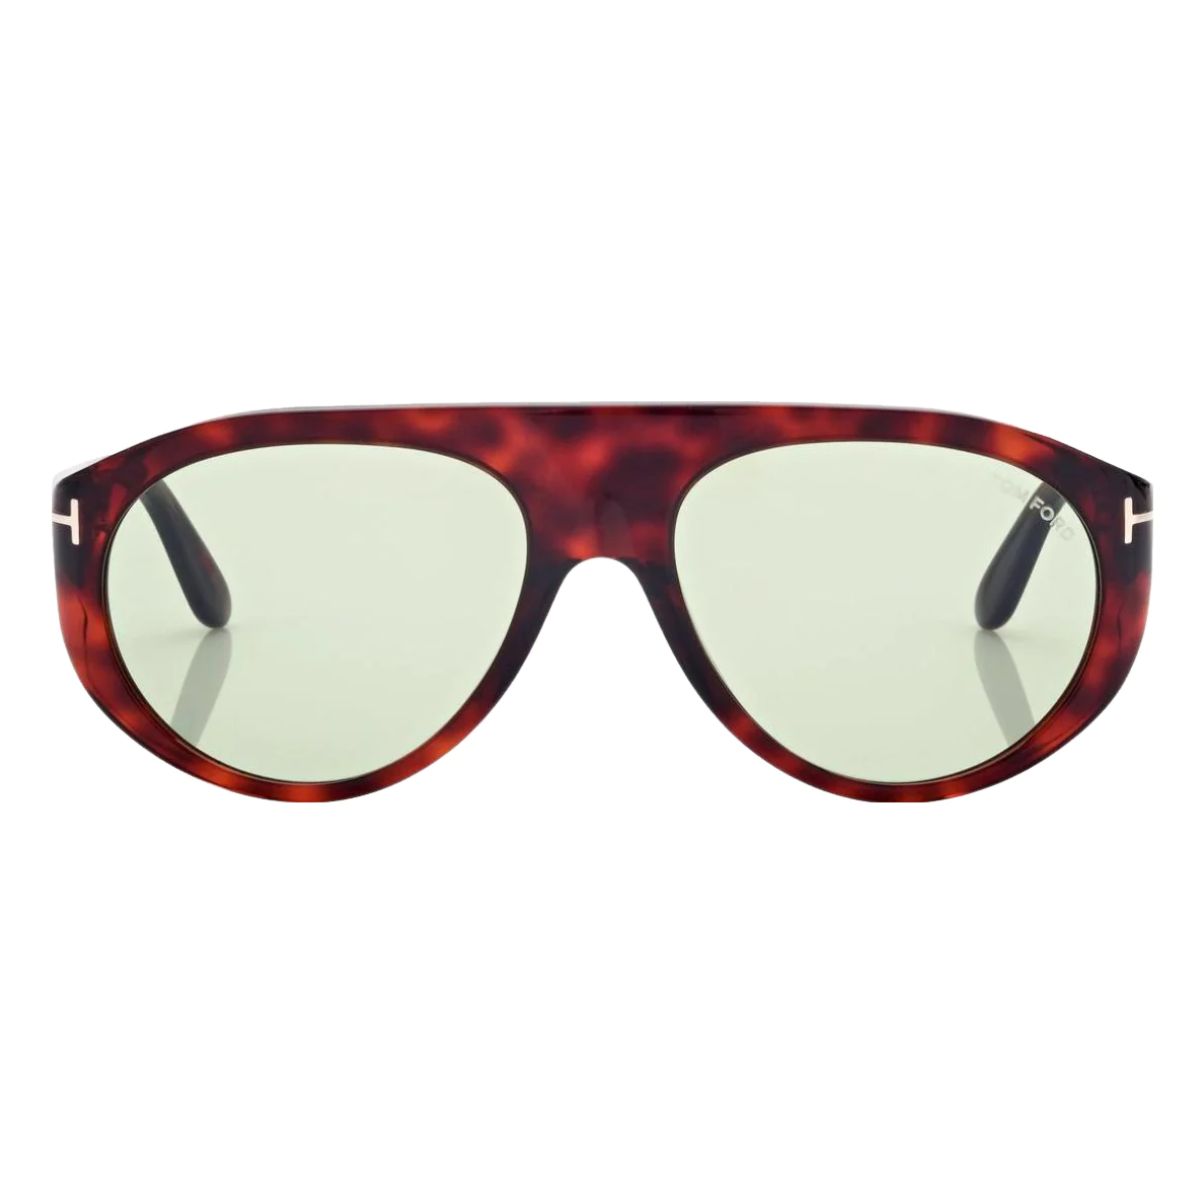 "Tom Ford REX-02 sunglasses displayed against a minimalist background, highlighting the red Havana frame and green lenses in an aviator shape."